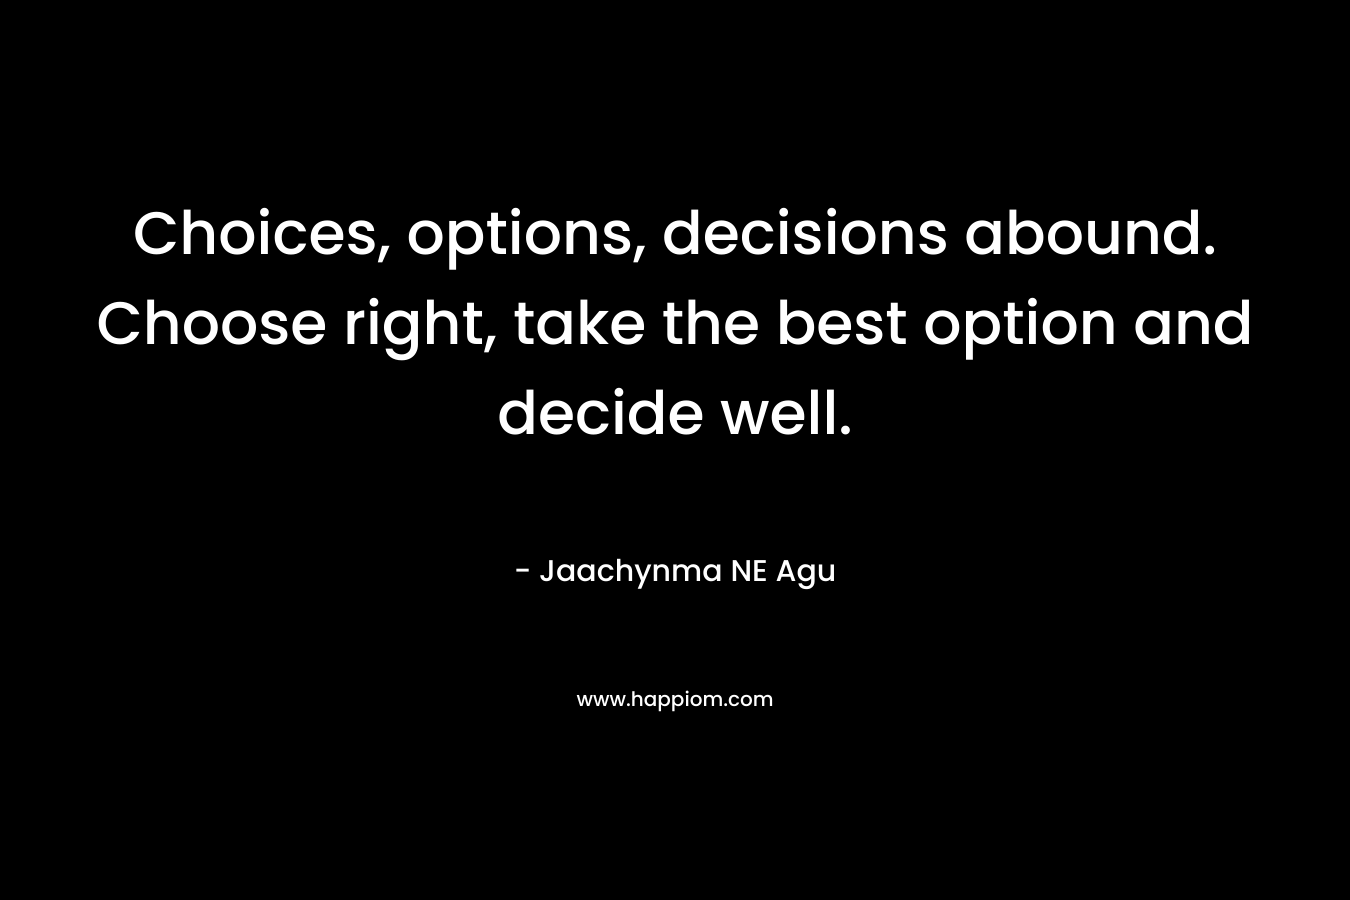 Choices, options, decisions abound. Choose right, take the best option and decide well.